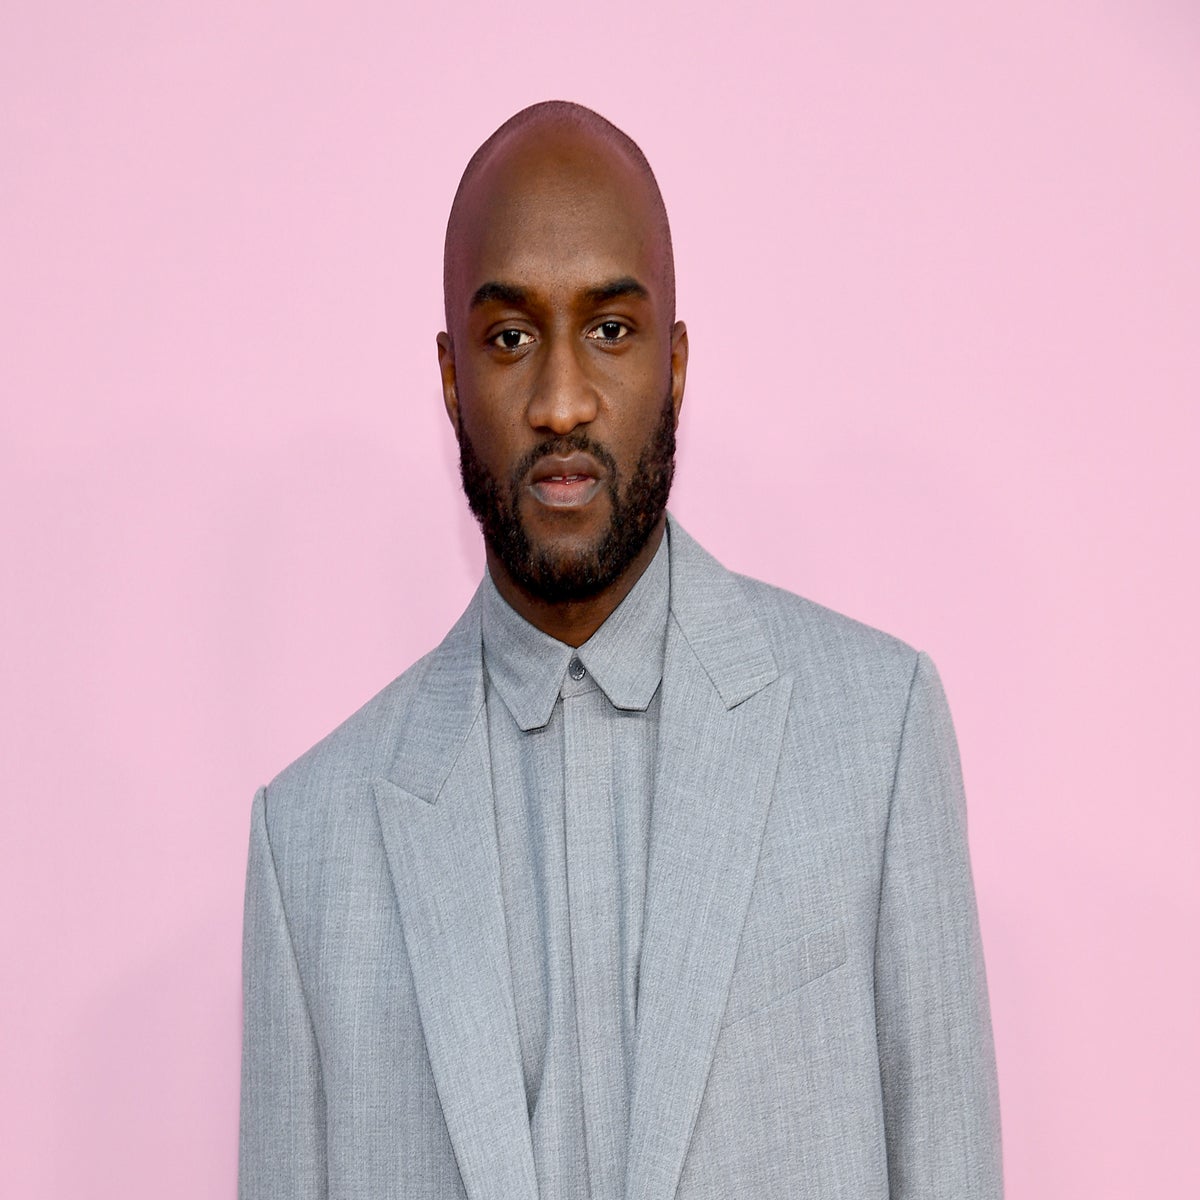 Tributes to Virgil Abloh, Articles